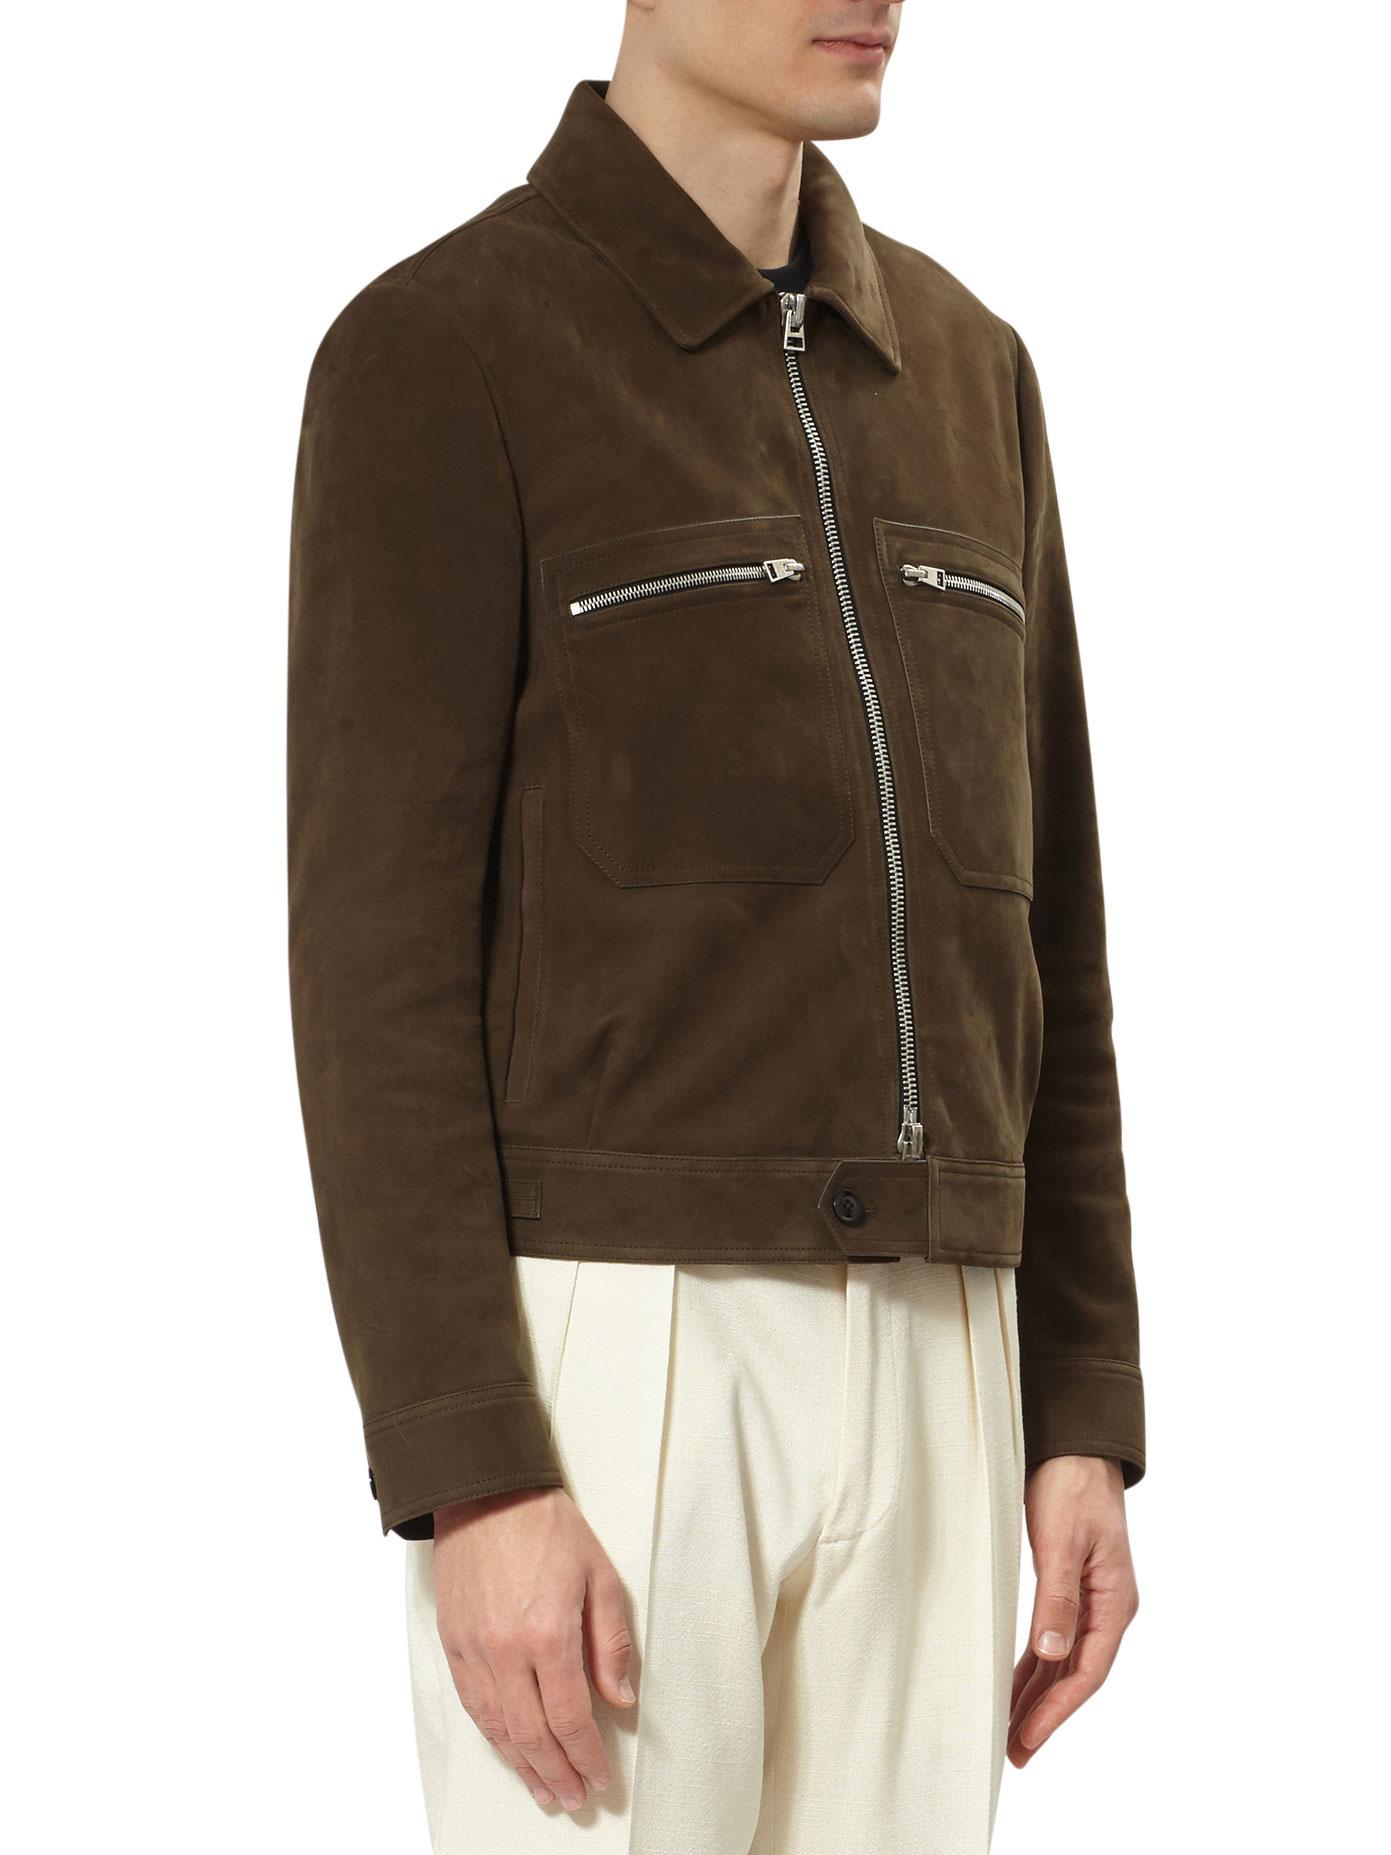 Tom Ford Suede Jacket in Brown for Men - Lyst